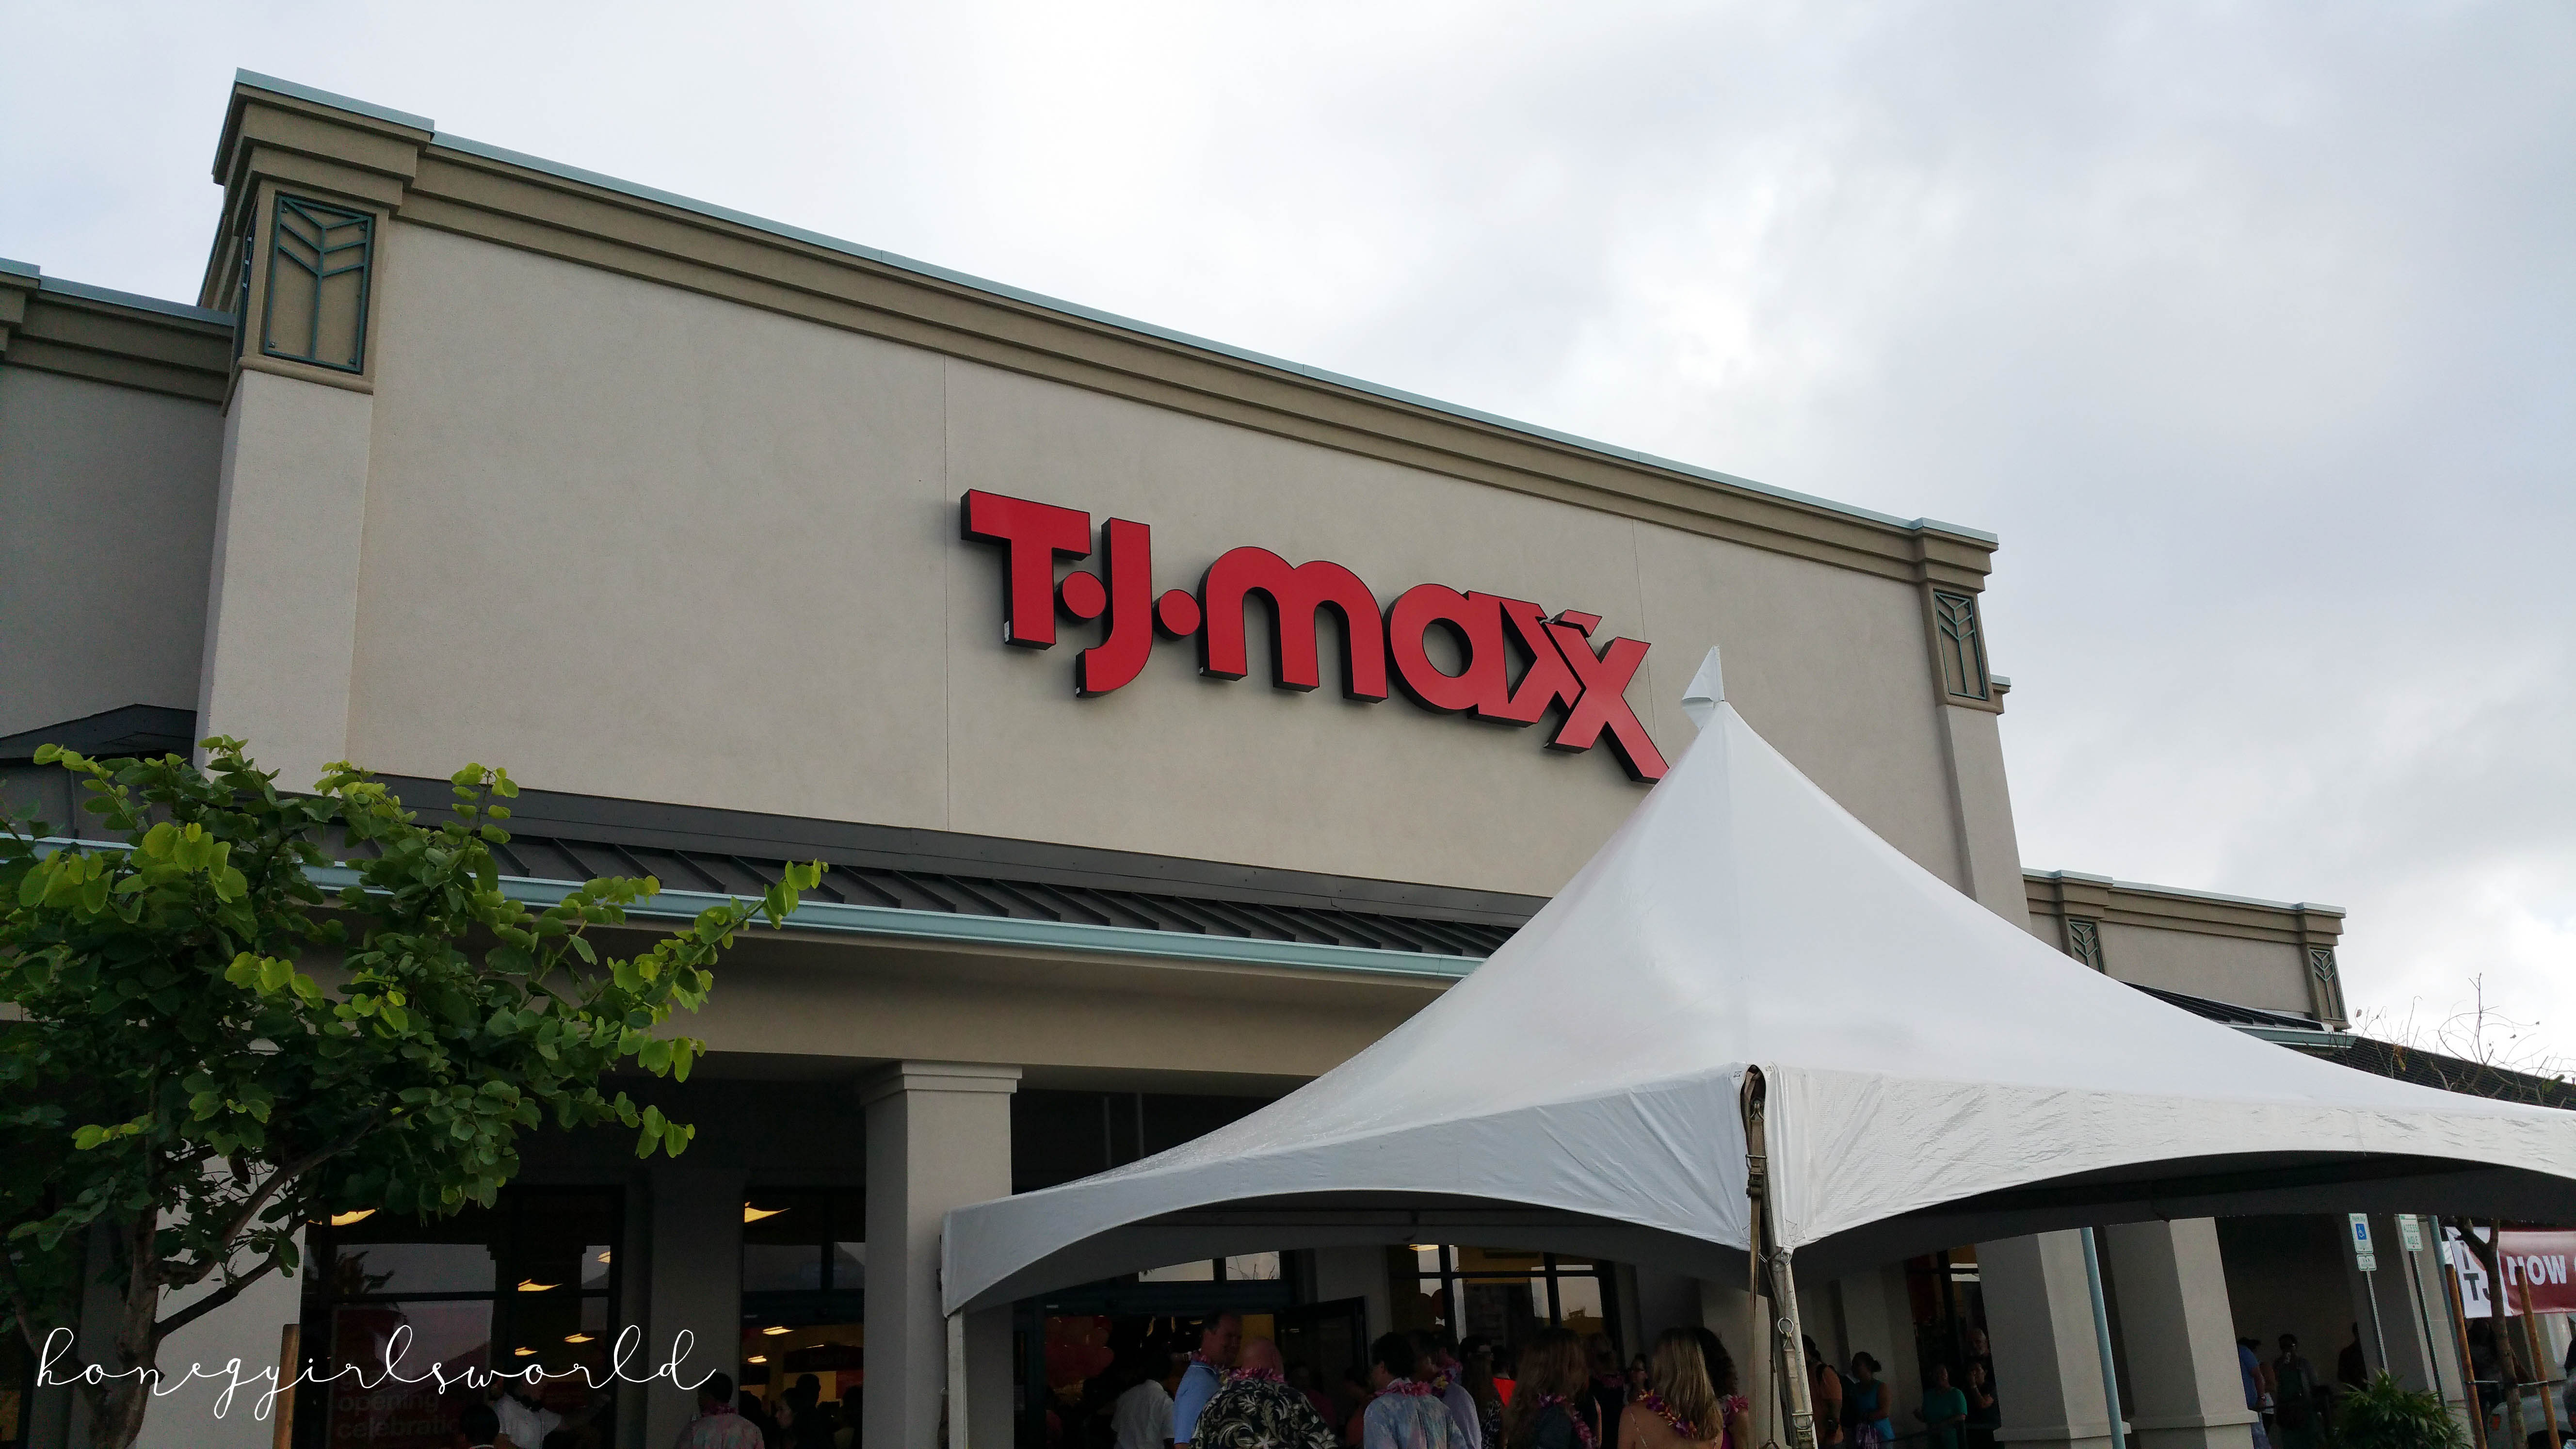 Maui Welcomes T.J. Maxx - Grand Opening Today